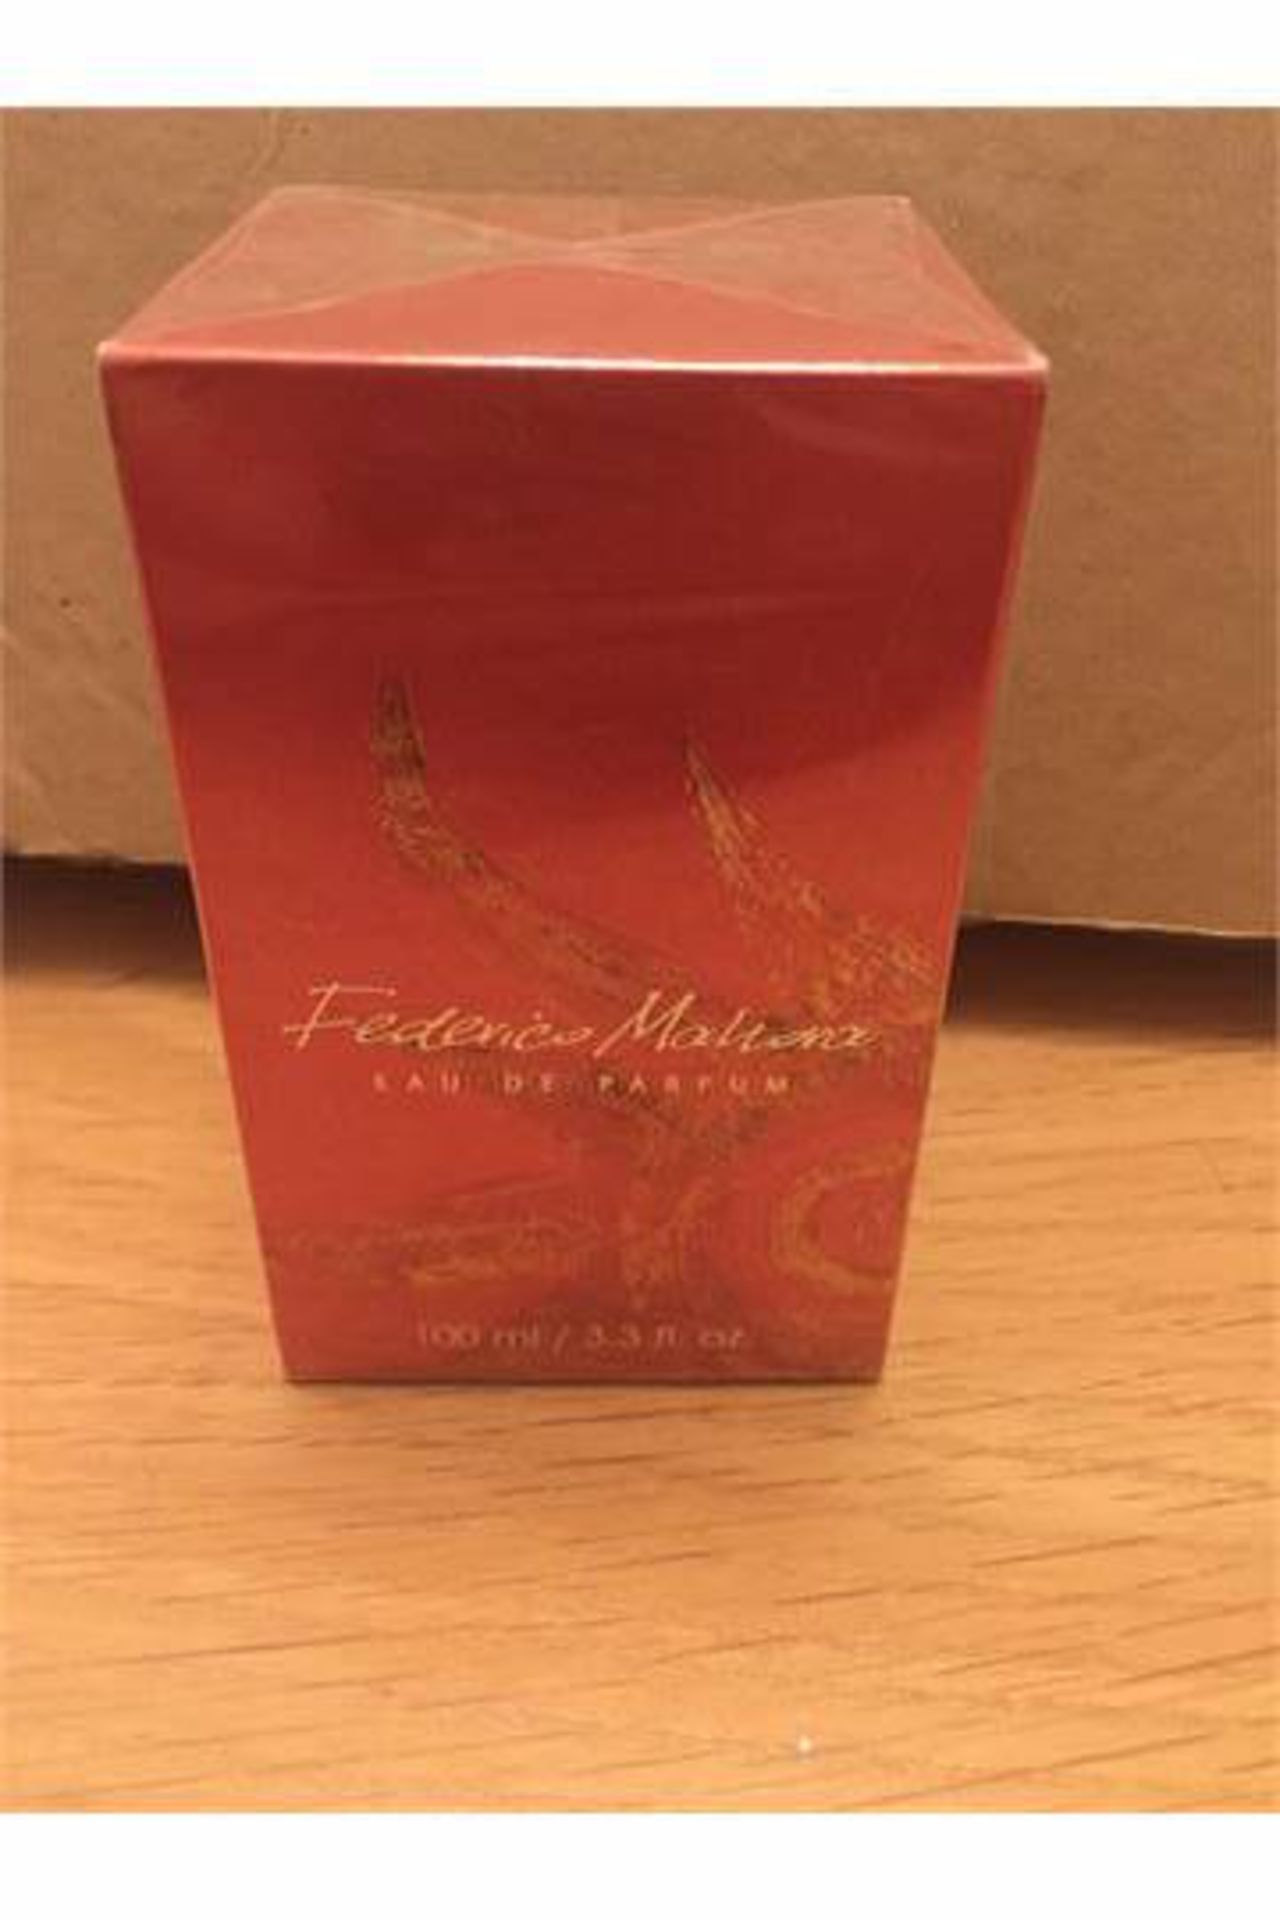 FM 283 Perfume by Federico Mahora Luxury Collection for Women 100ml_RRP £29.00_Brand new,Sealed,